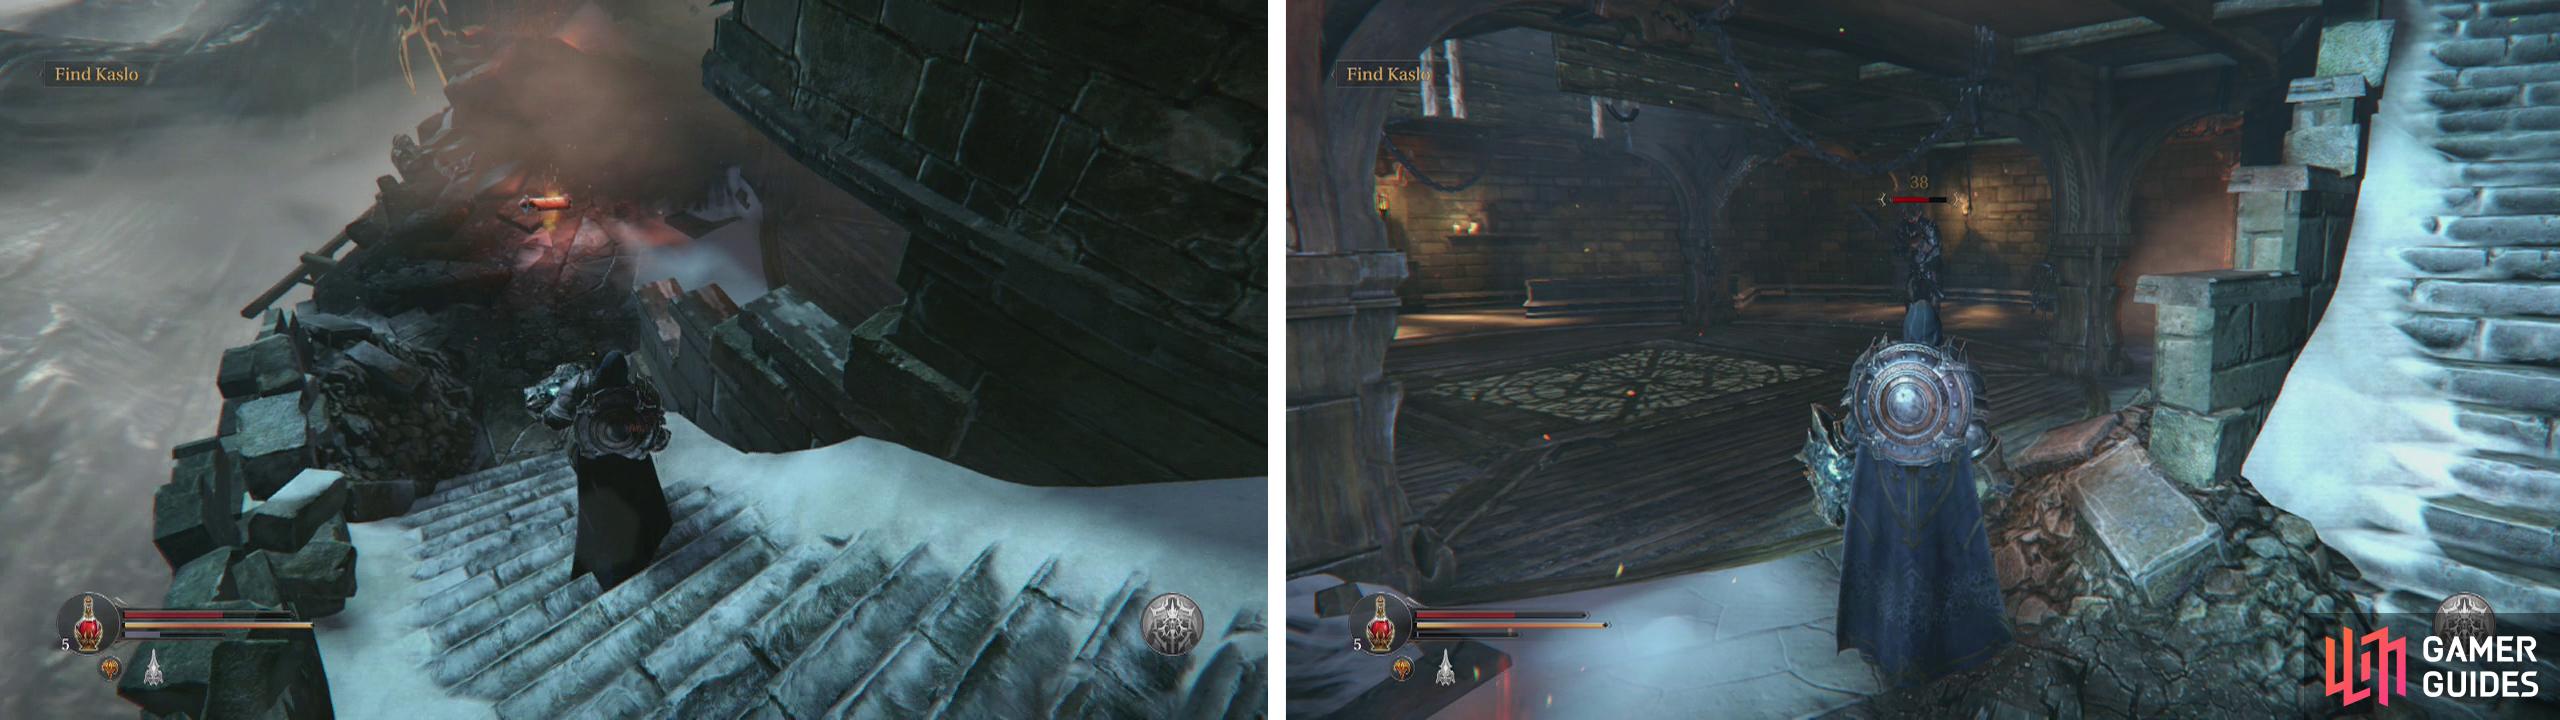 Descend the stairs into the tower to find an Audion Note (left). Defeat the Marauder hanging out inside (right).